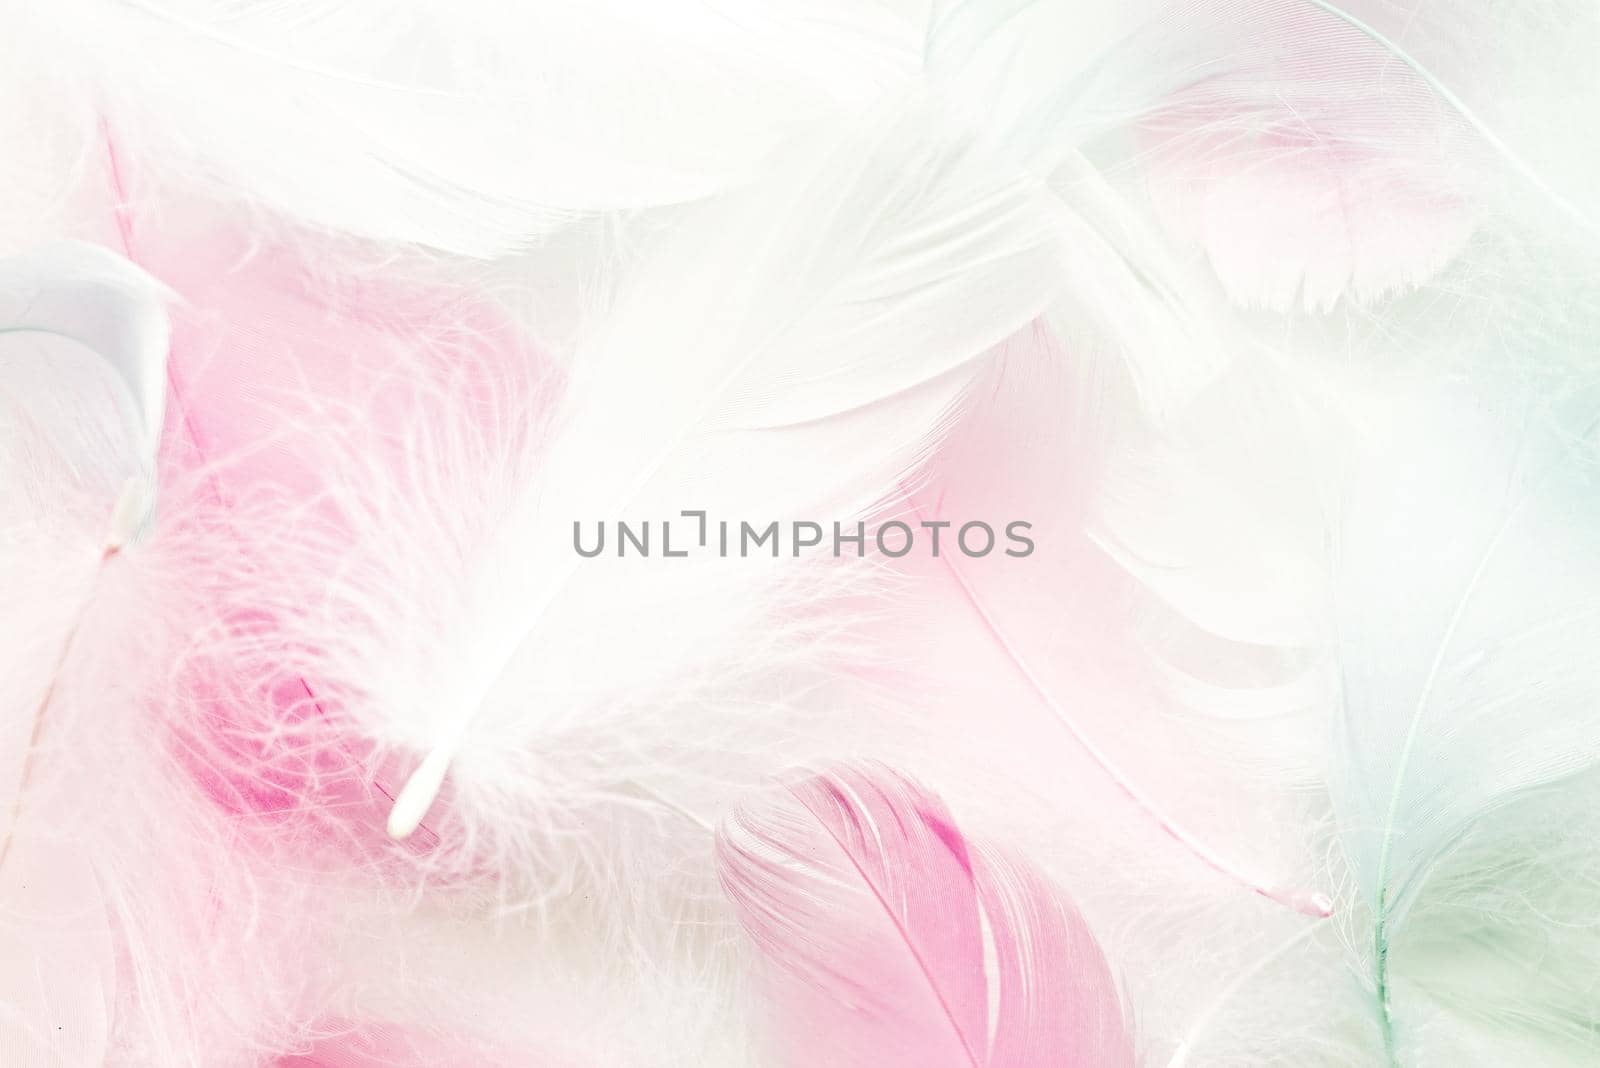 Abstract background. Texture. Pastel colored fluffy bird feathers background